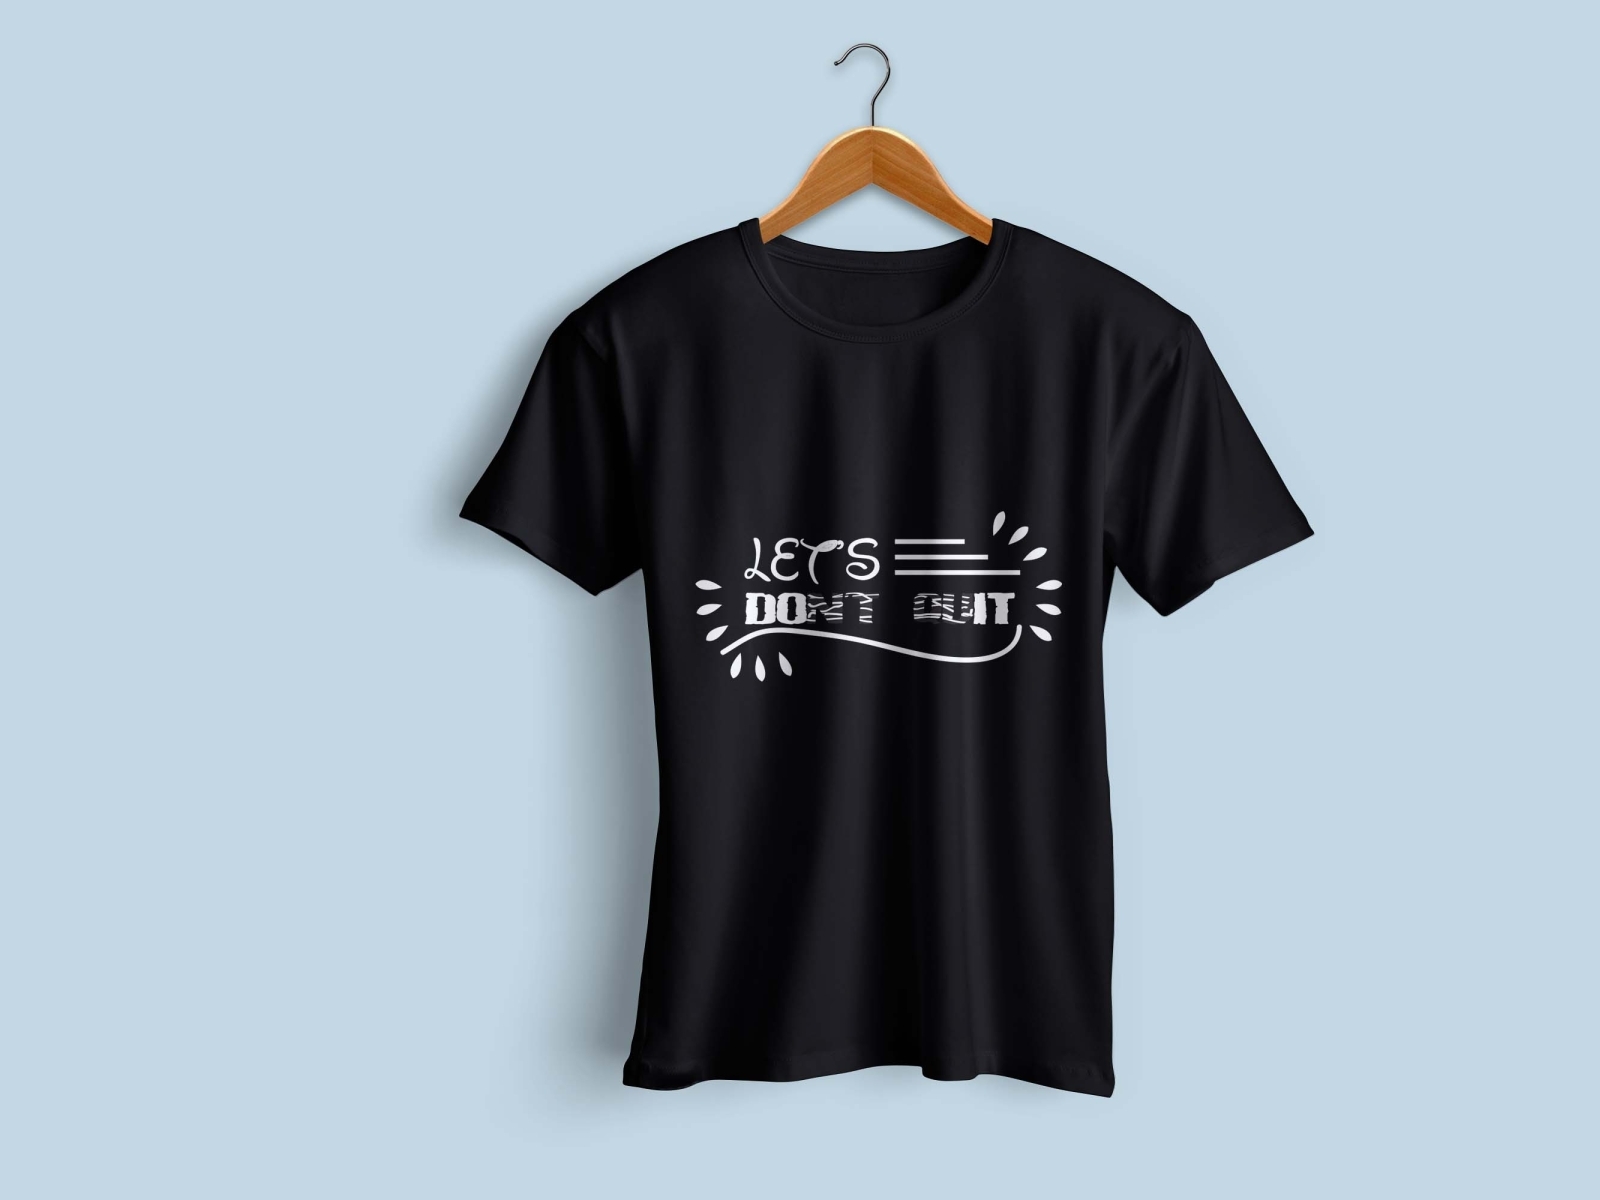 T shirt design by Shah Kanon on Dribbble